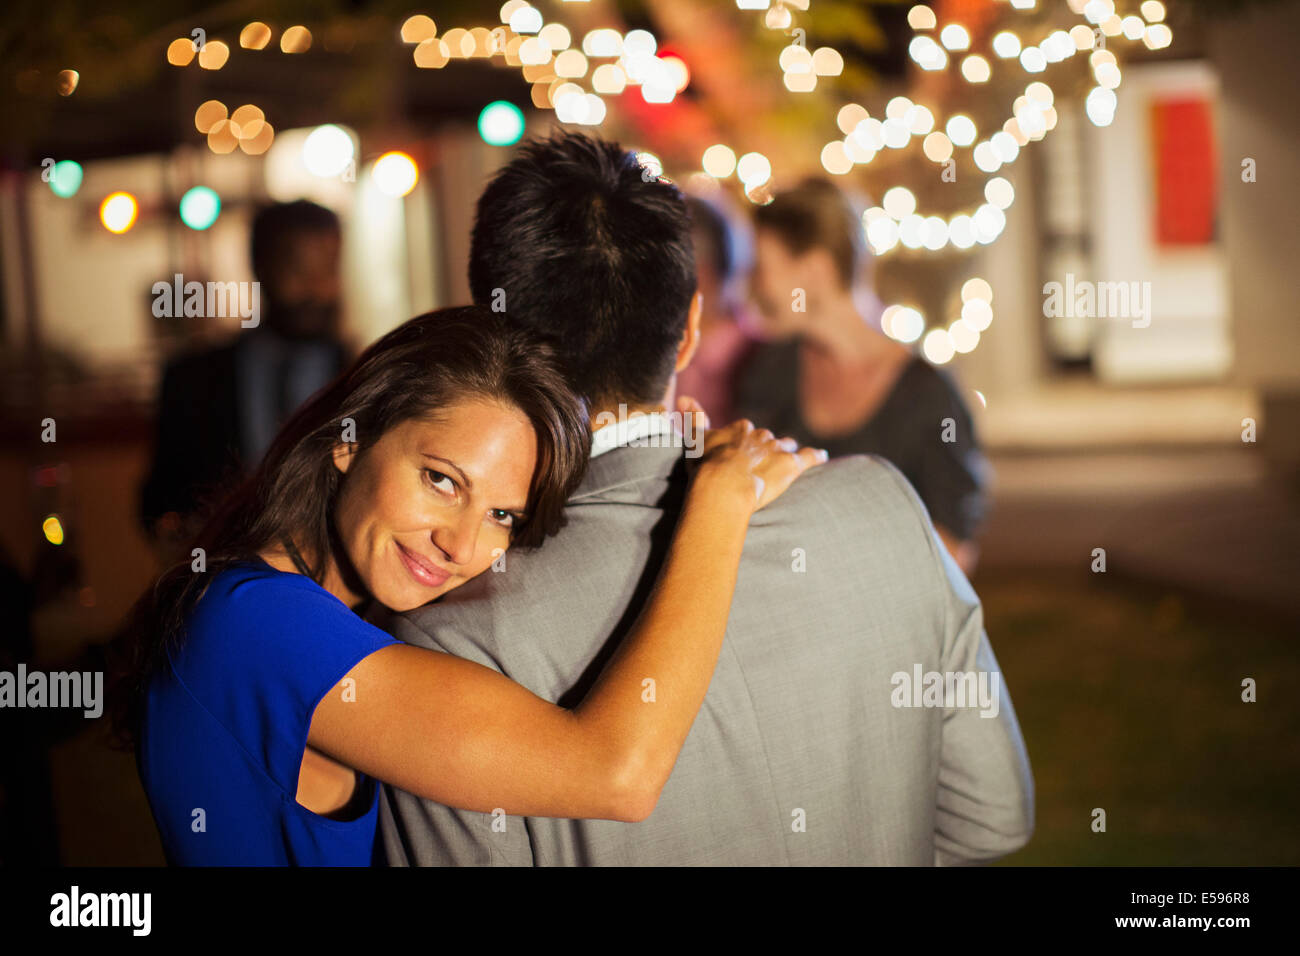 Couple hugging at party Stock Photo